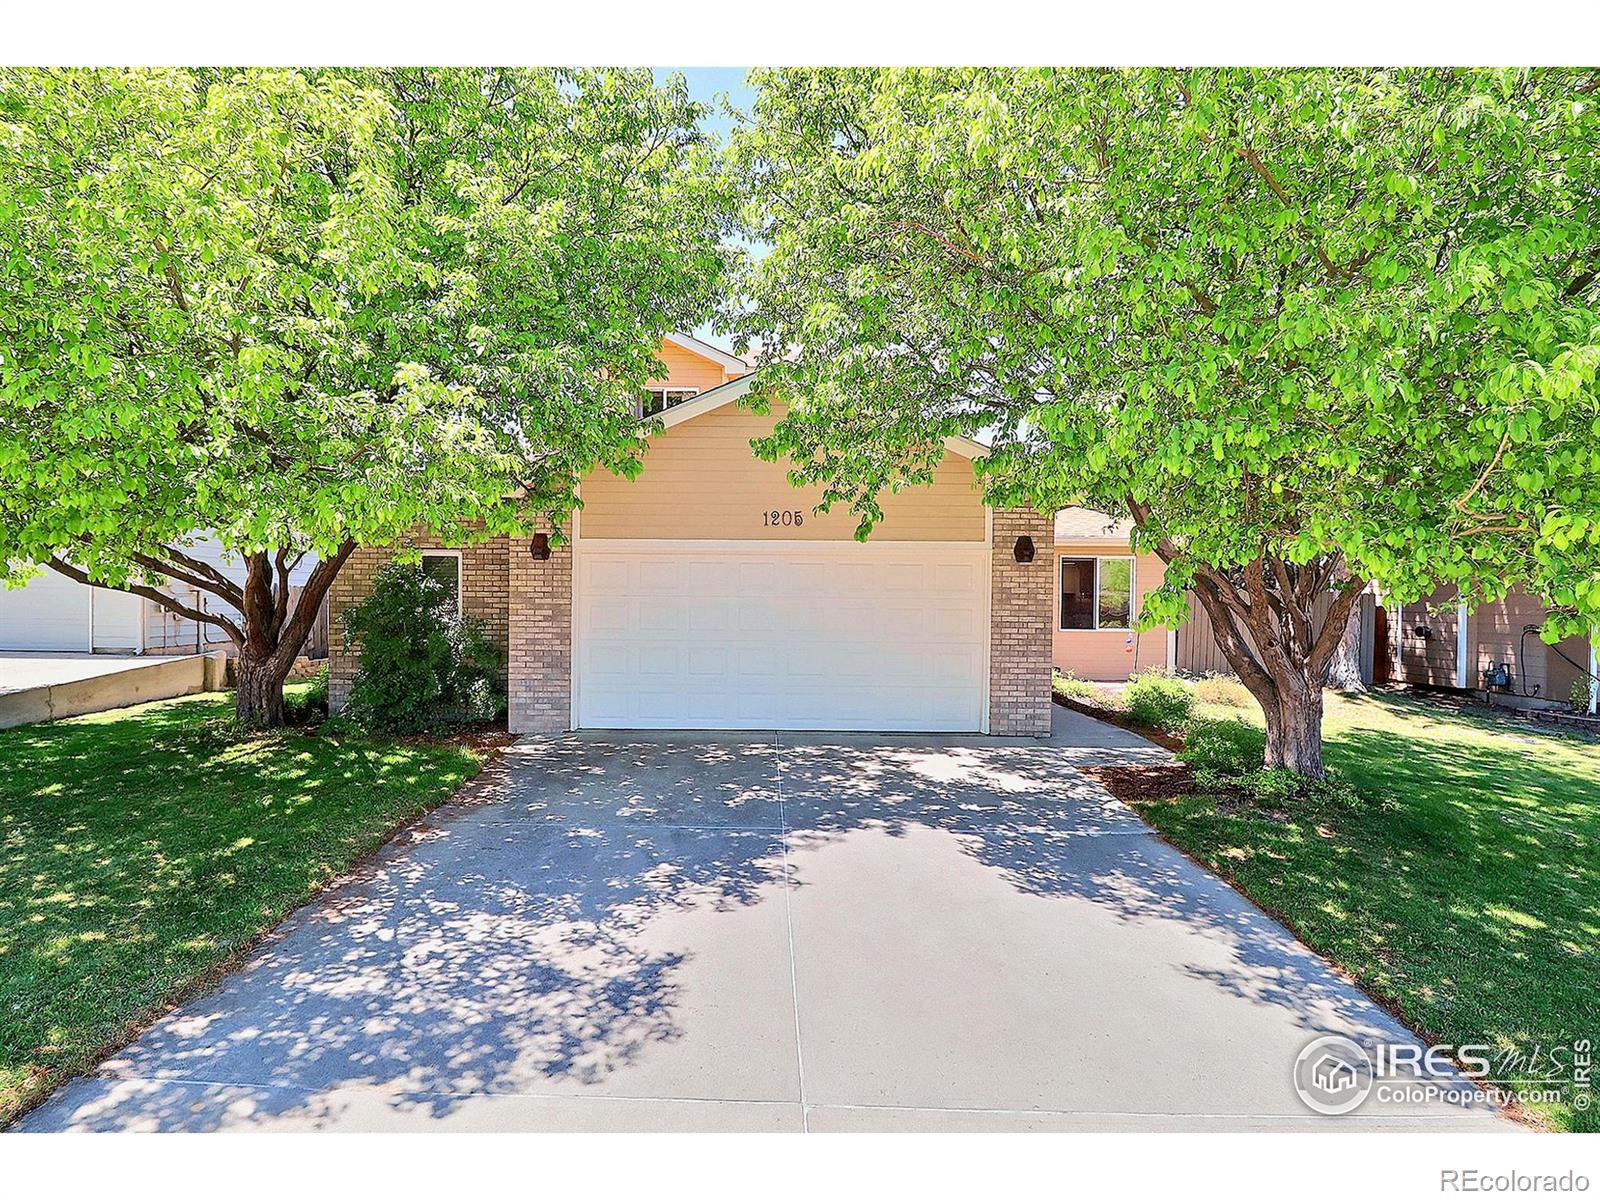 1205  53rd Avenue, greeley MLS: 4567891009957 Beds: 5 Baths: 4 Price: $474,000